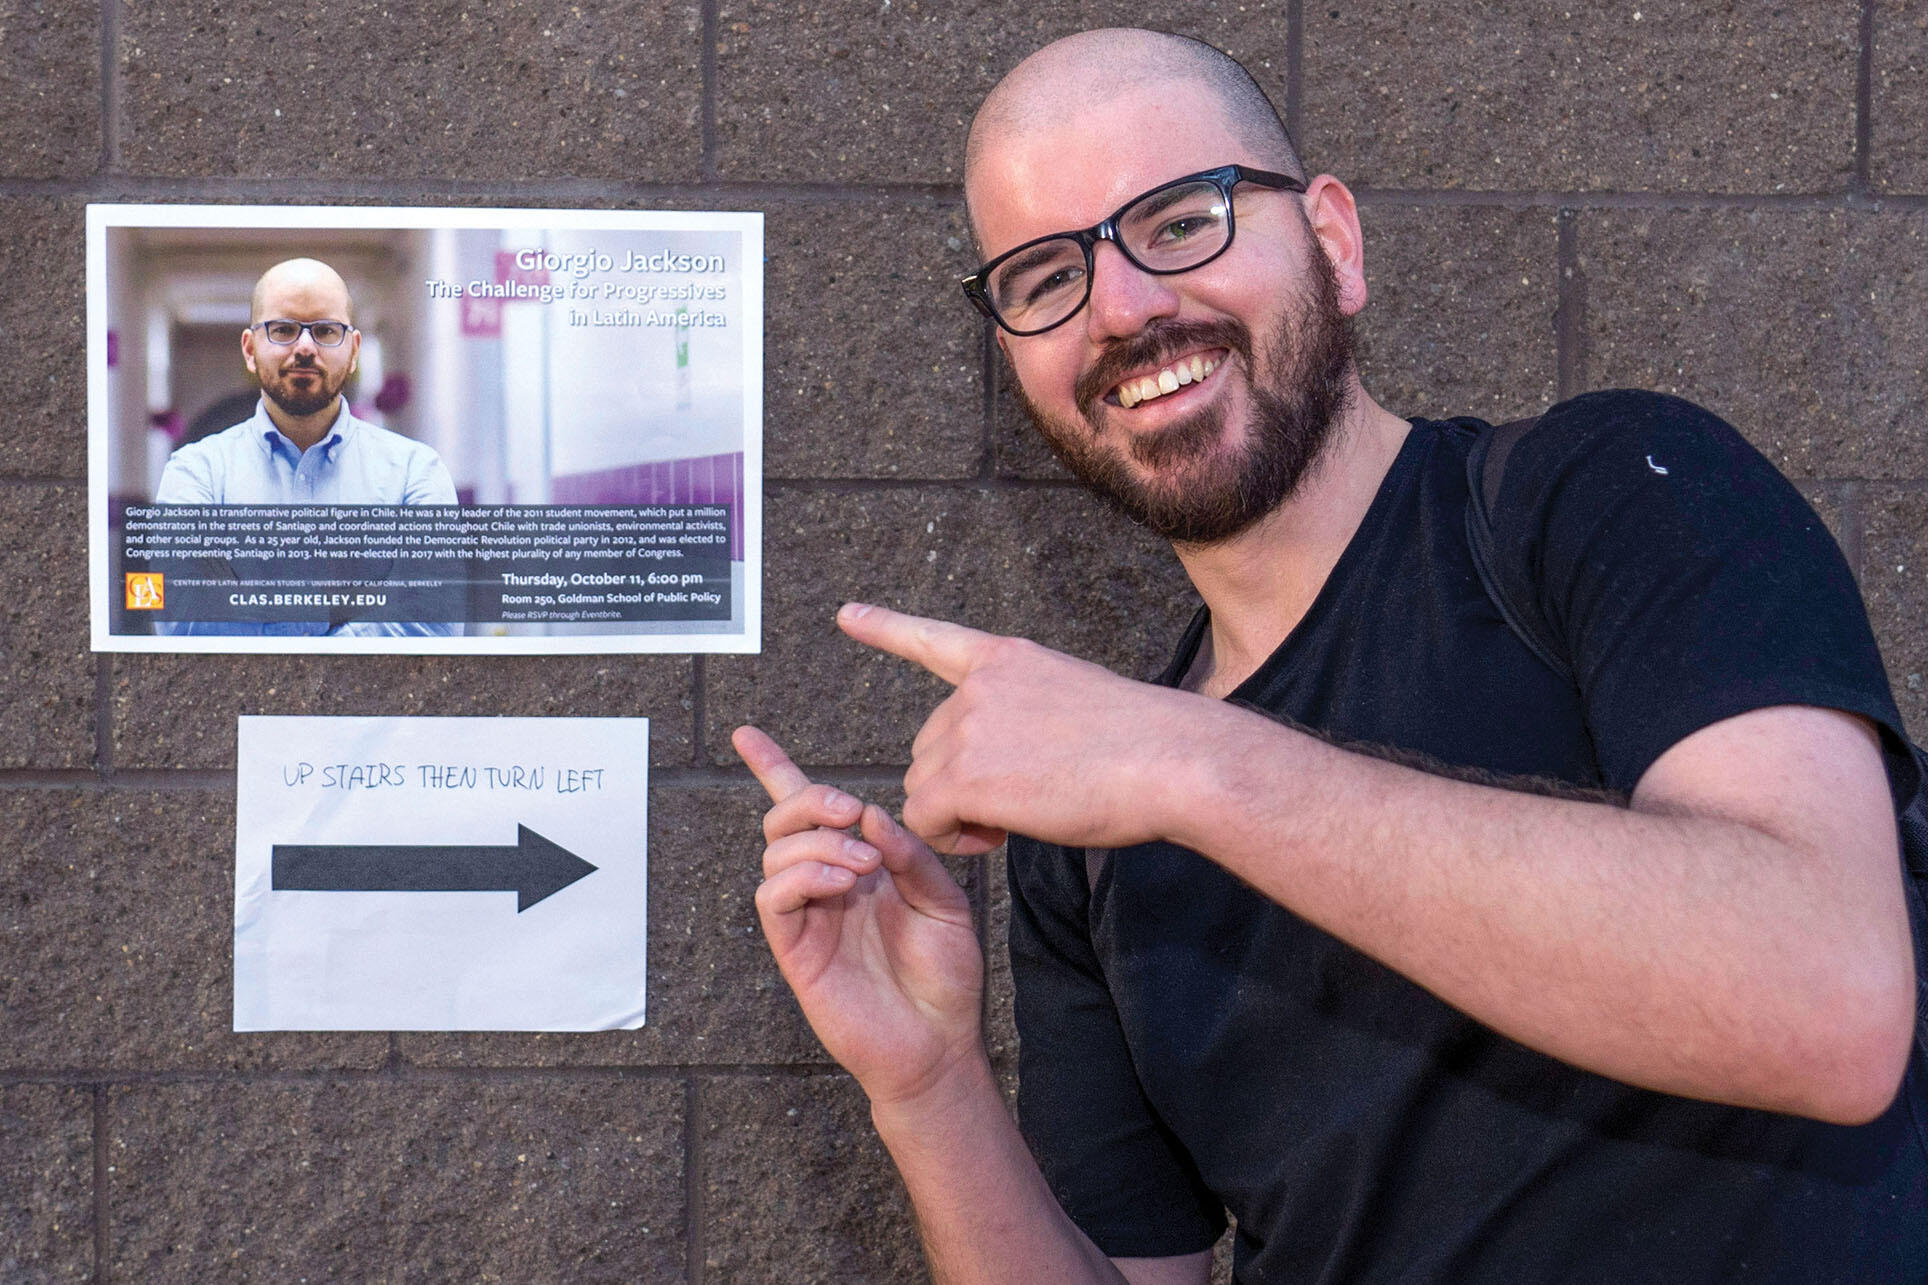 Giorgio Jackson with a poster advertising his talk at Berkeley, October 2018. (Photo by Jim Block.)